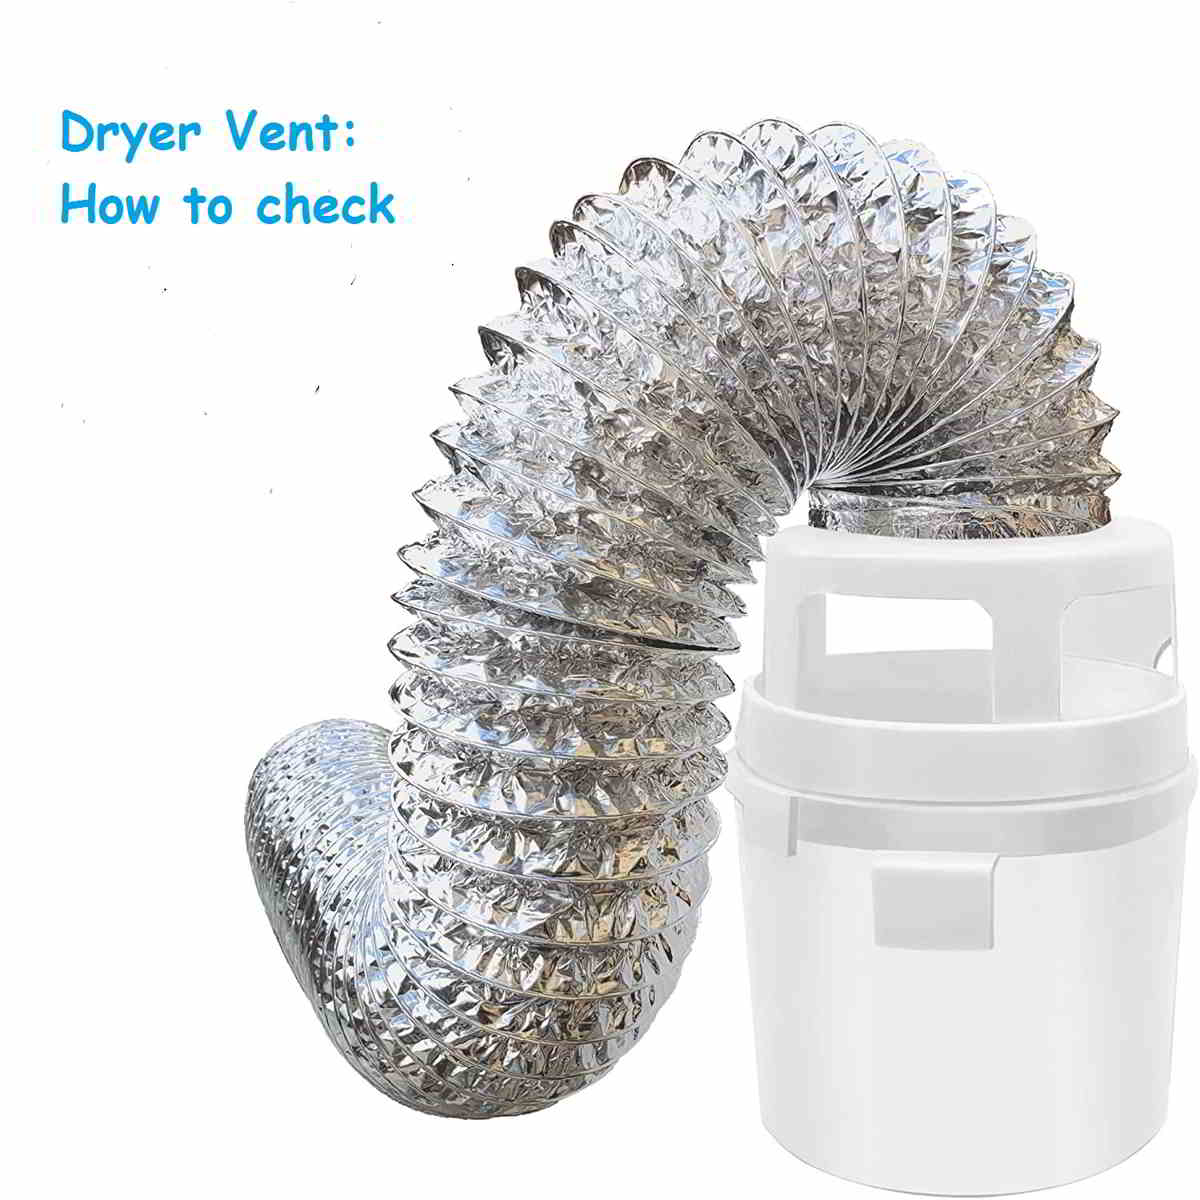 How to check dryer vent